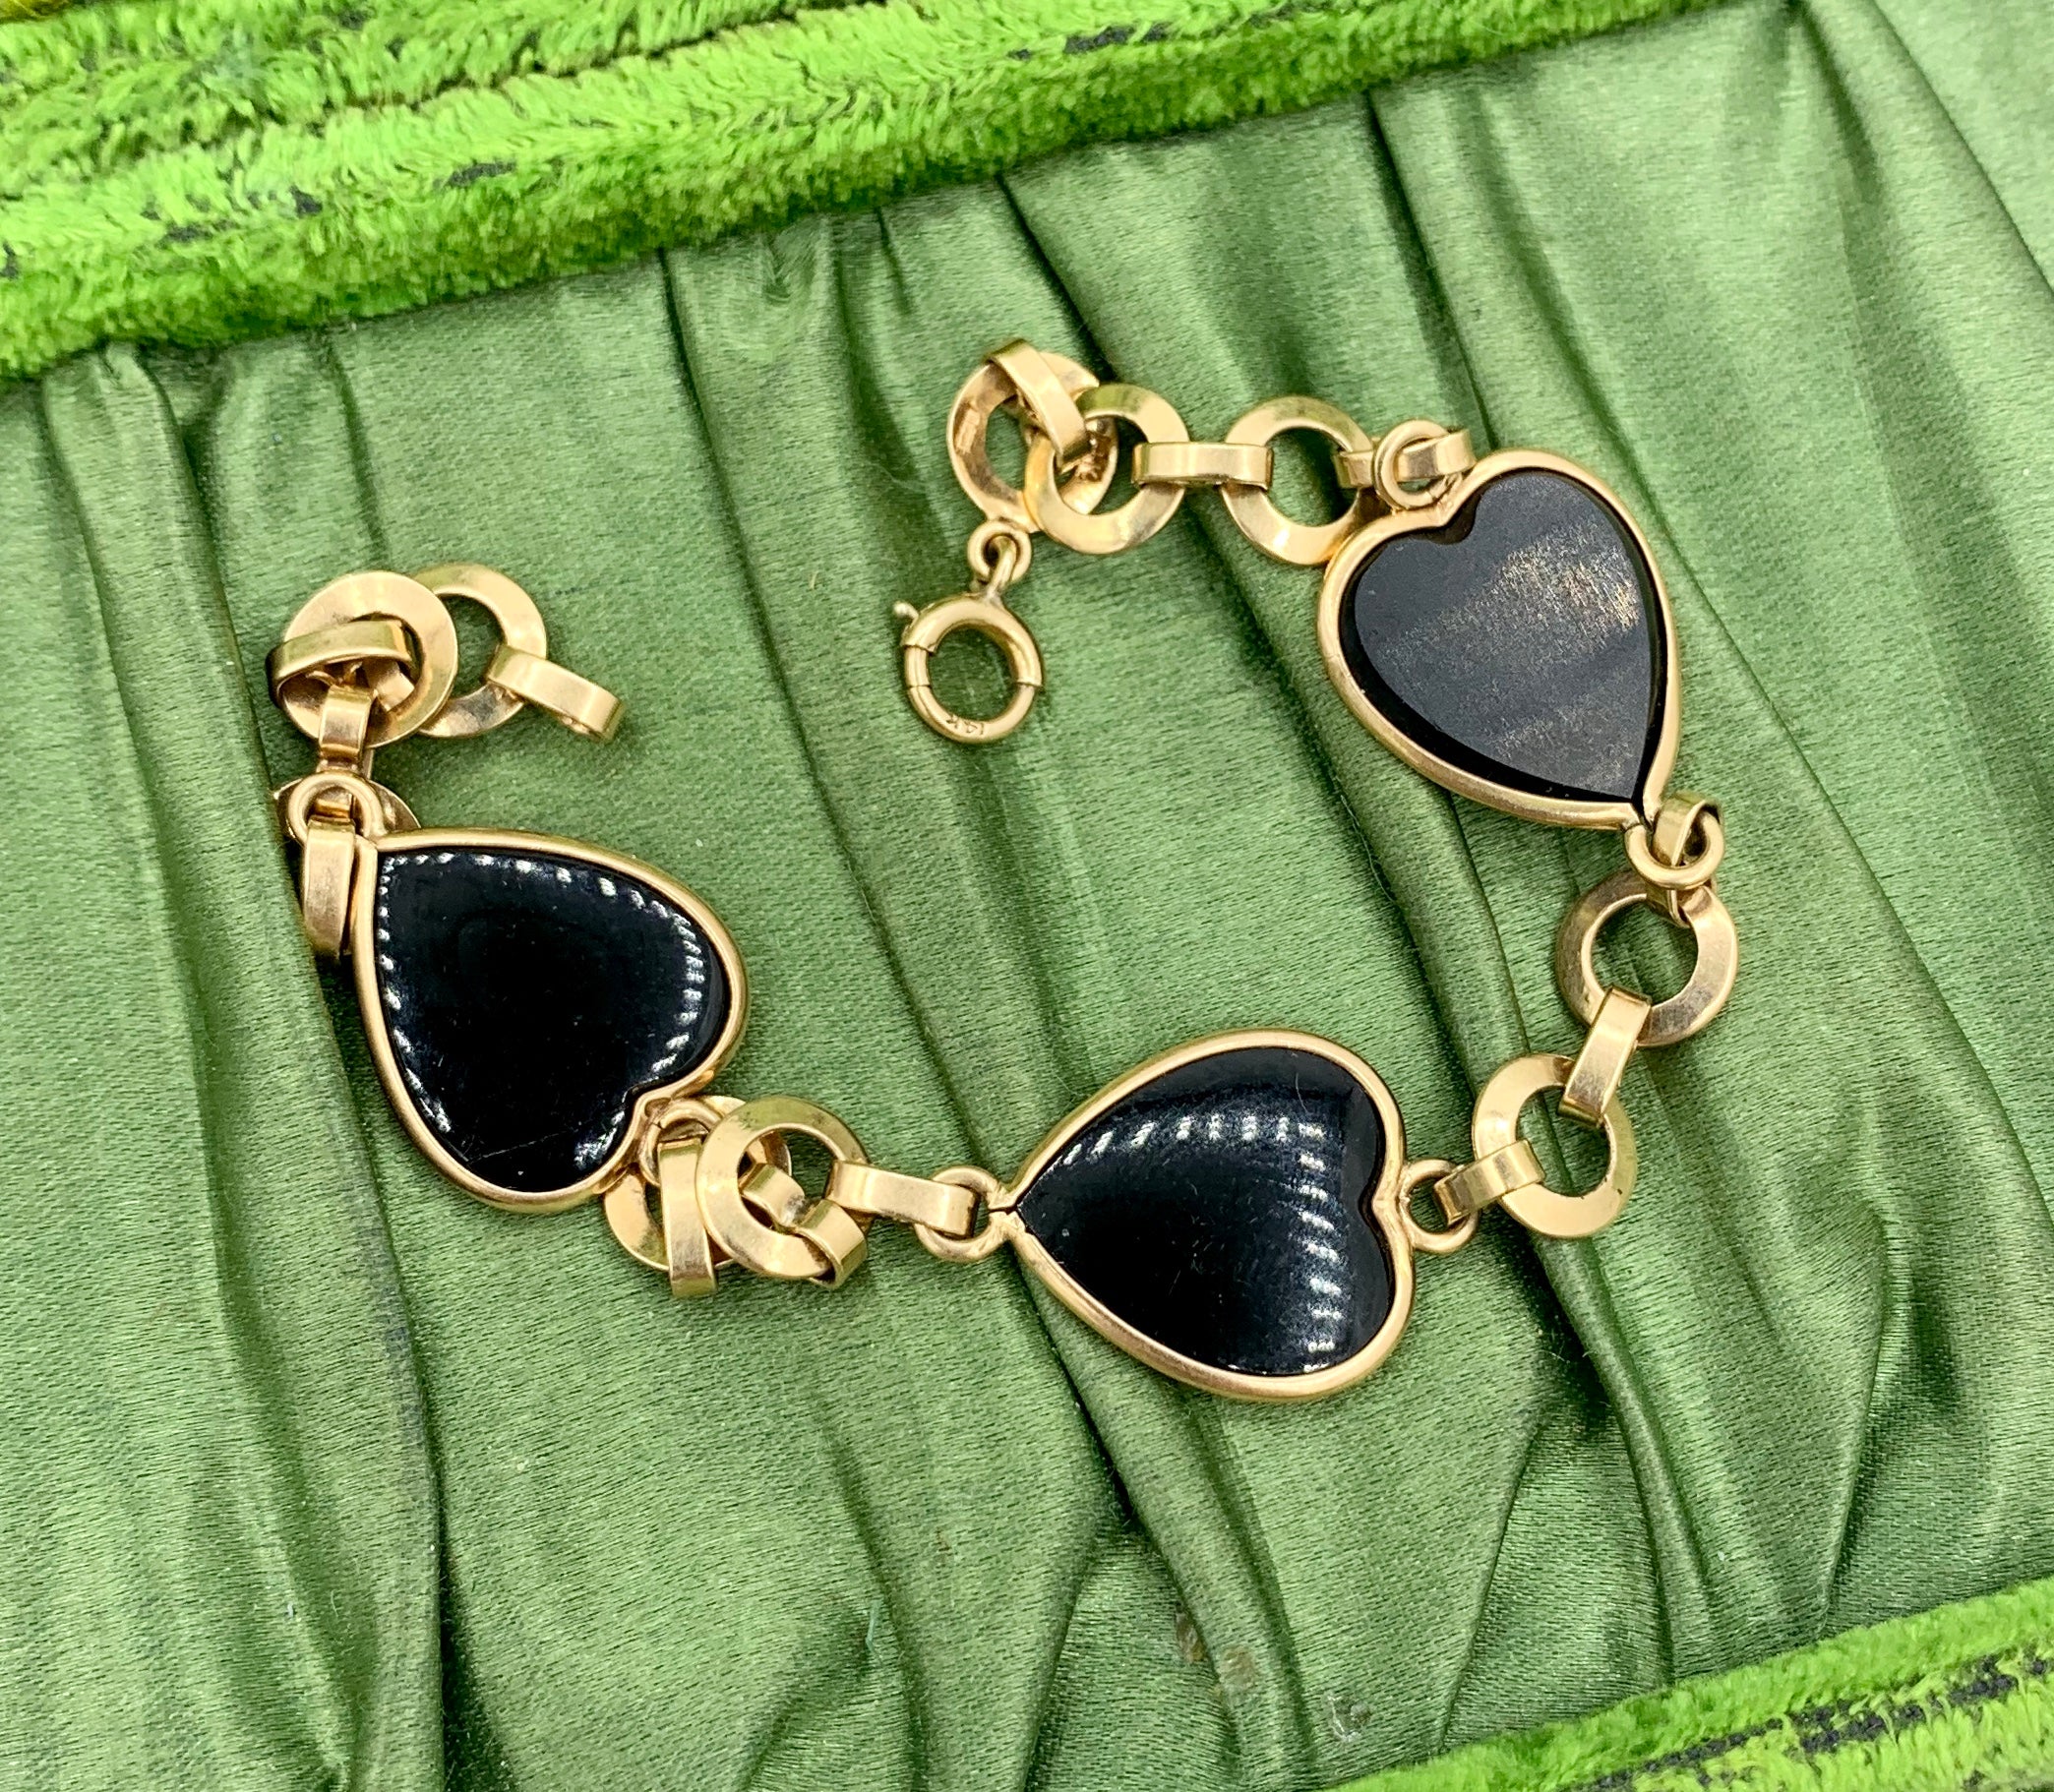 This is an exquisite Mid-Century Modern Eames Era period Bracelet with stunning Black Onyx Hearts set in 14 Karat Rose Gold.   The elegant clean lines of the onyx hearts and the circular gold links epitomize Mid-Century jewelry design.  The bracelet